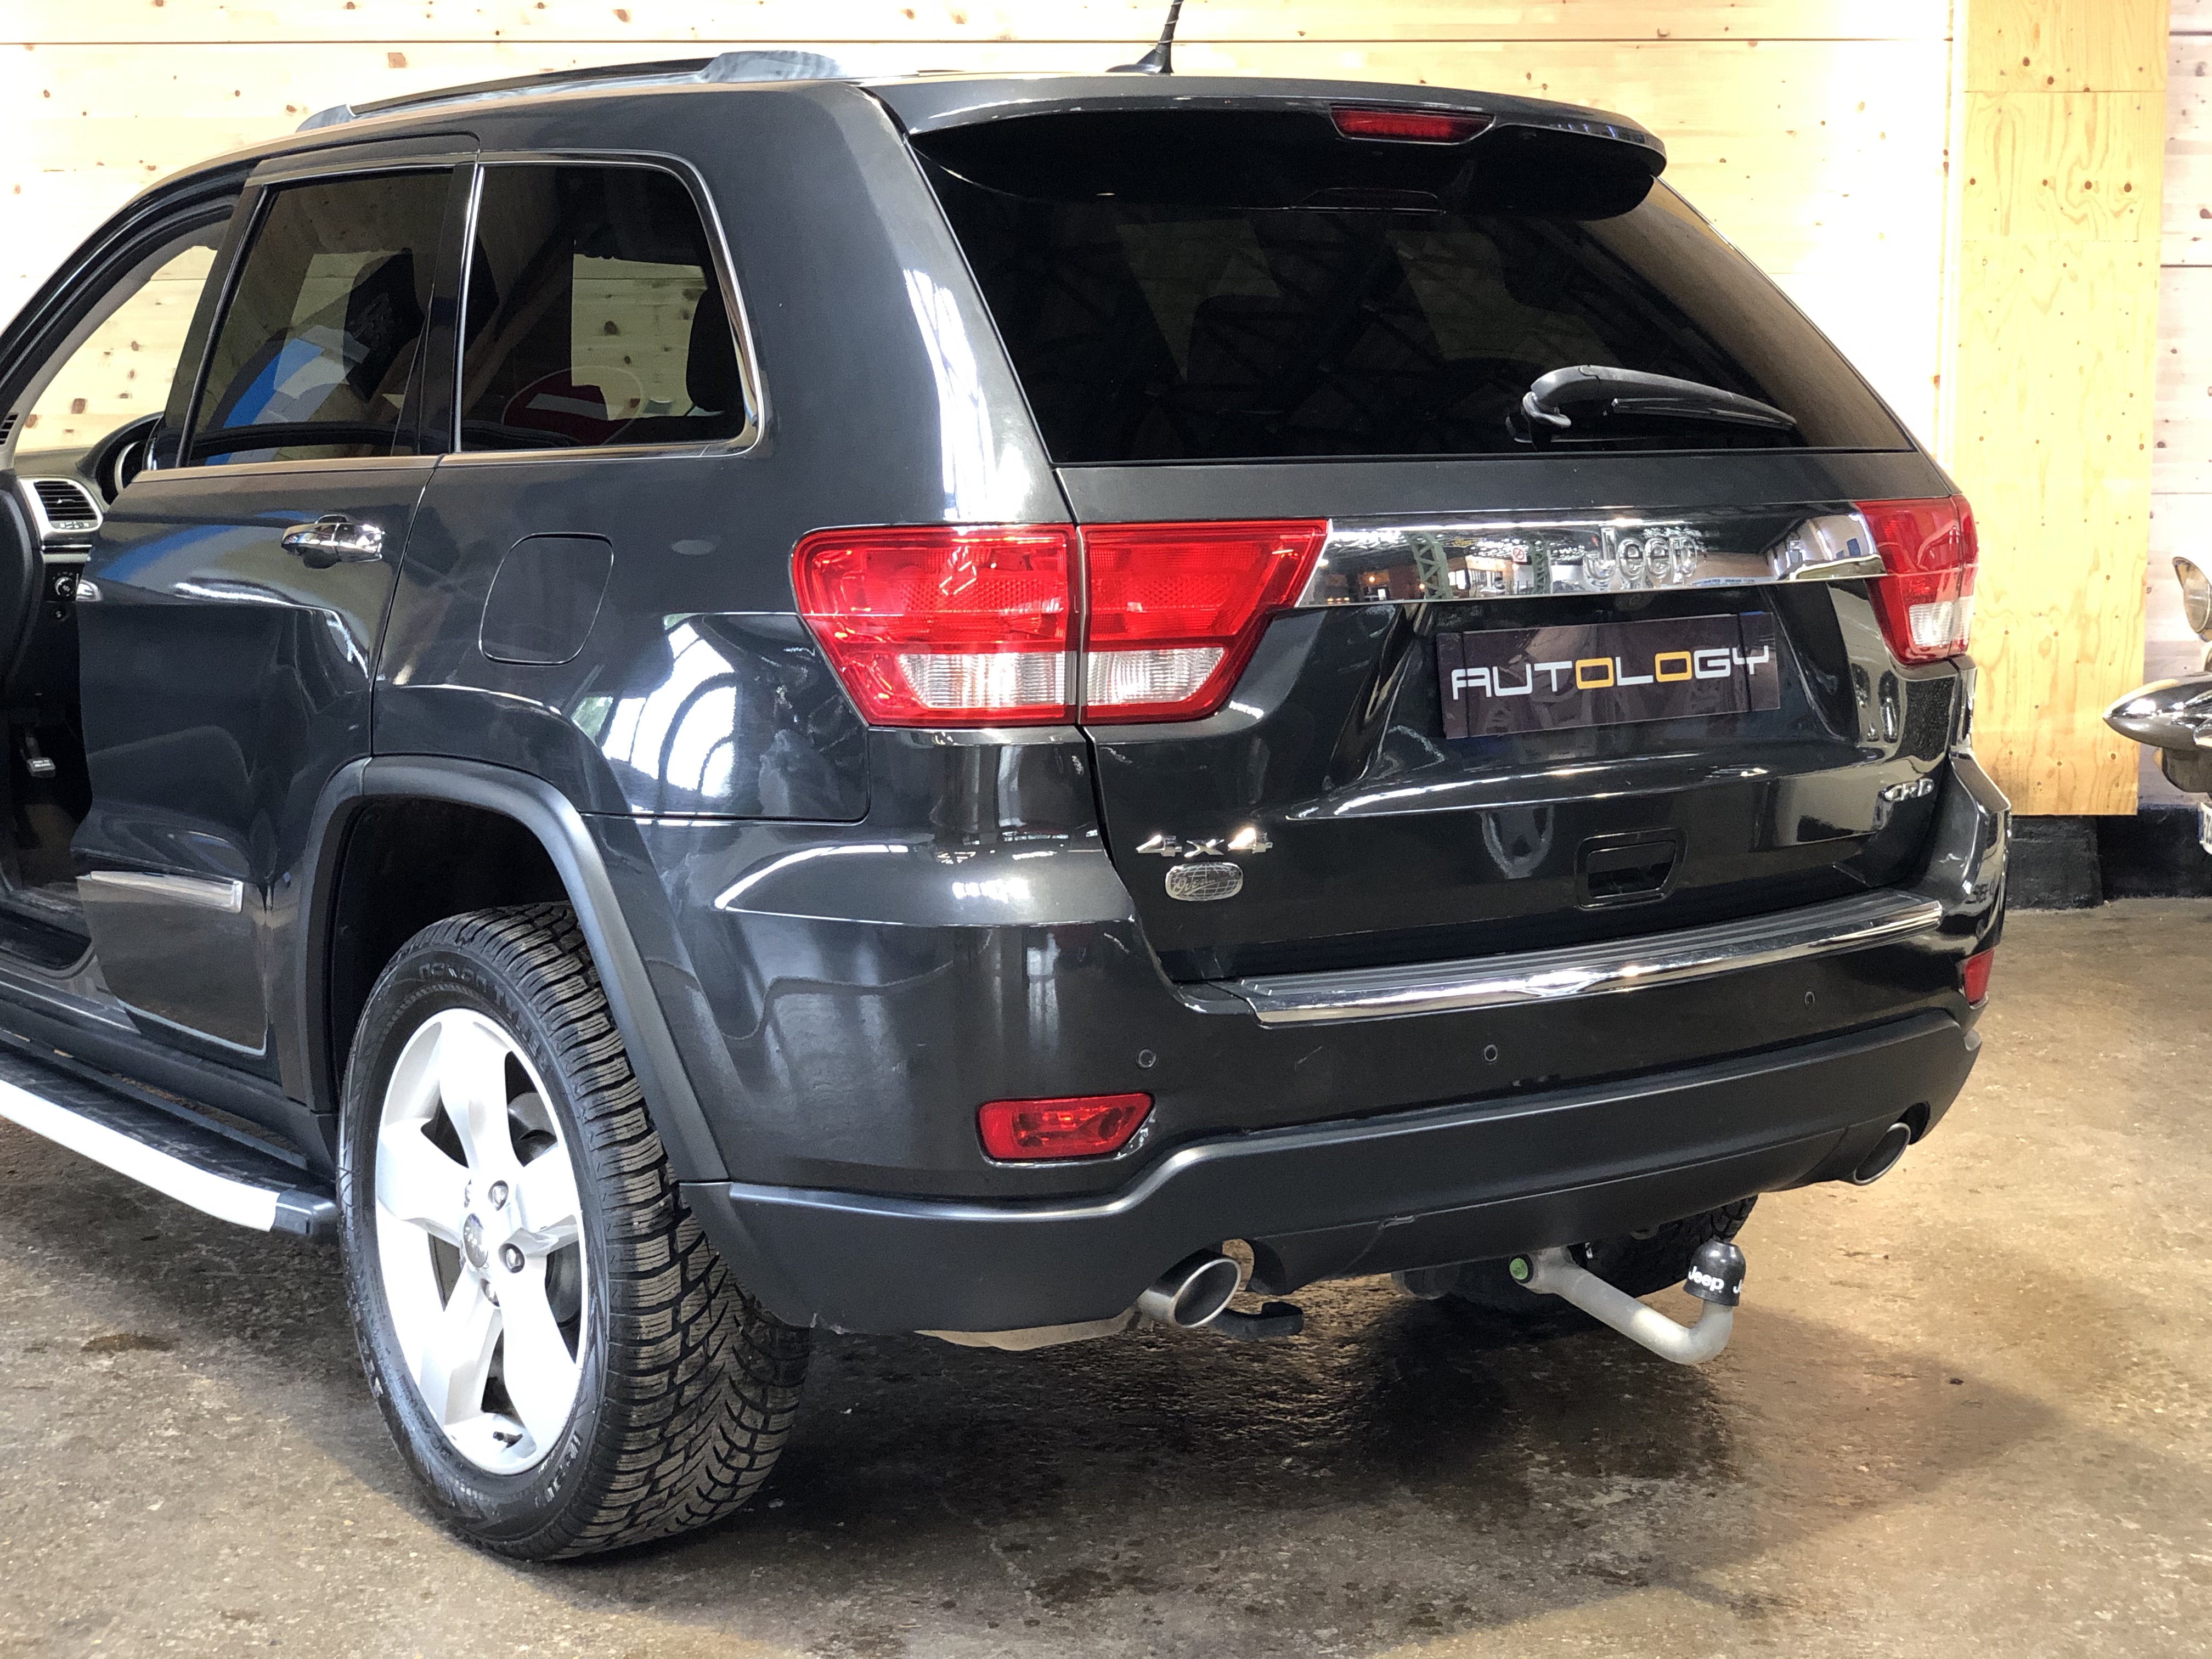 Jeep Grand Cherokee 3.0 CRD 241ch Overland AUTOLOGY